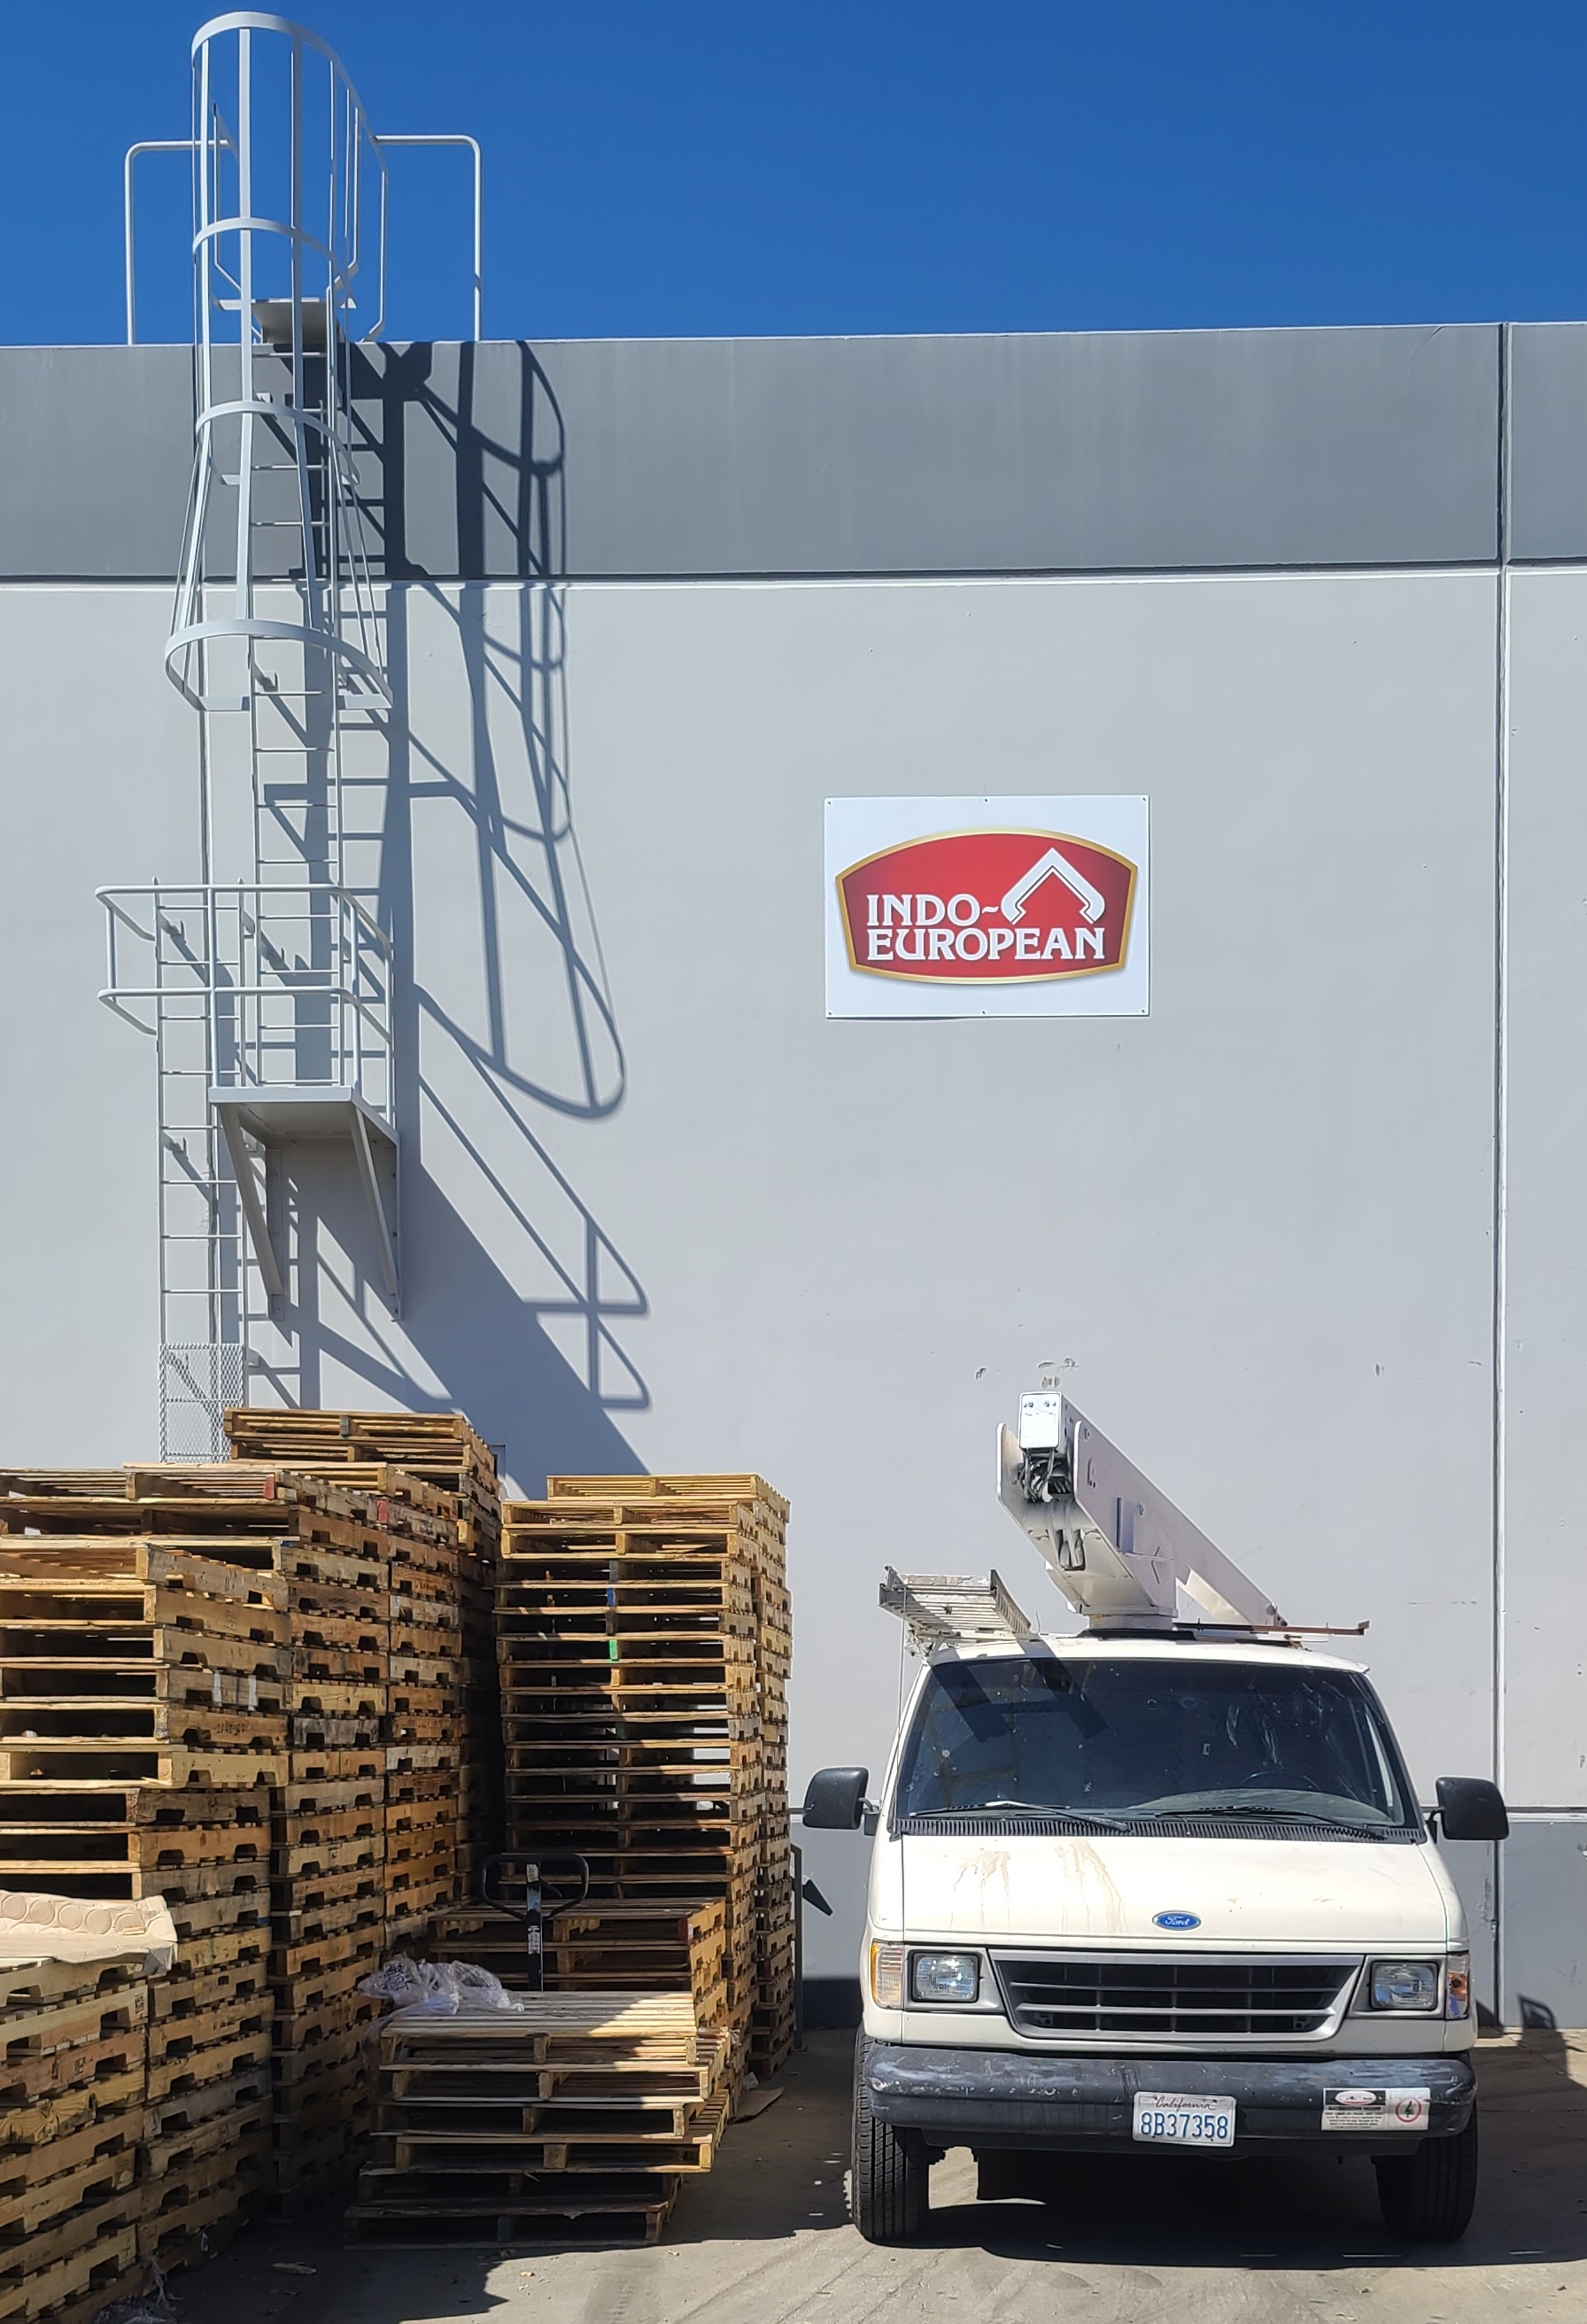 Our custom metal business sign package for Indo-European's Commerce facility loading bay.